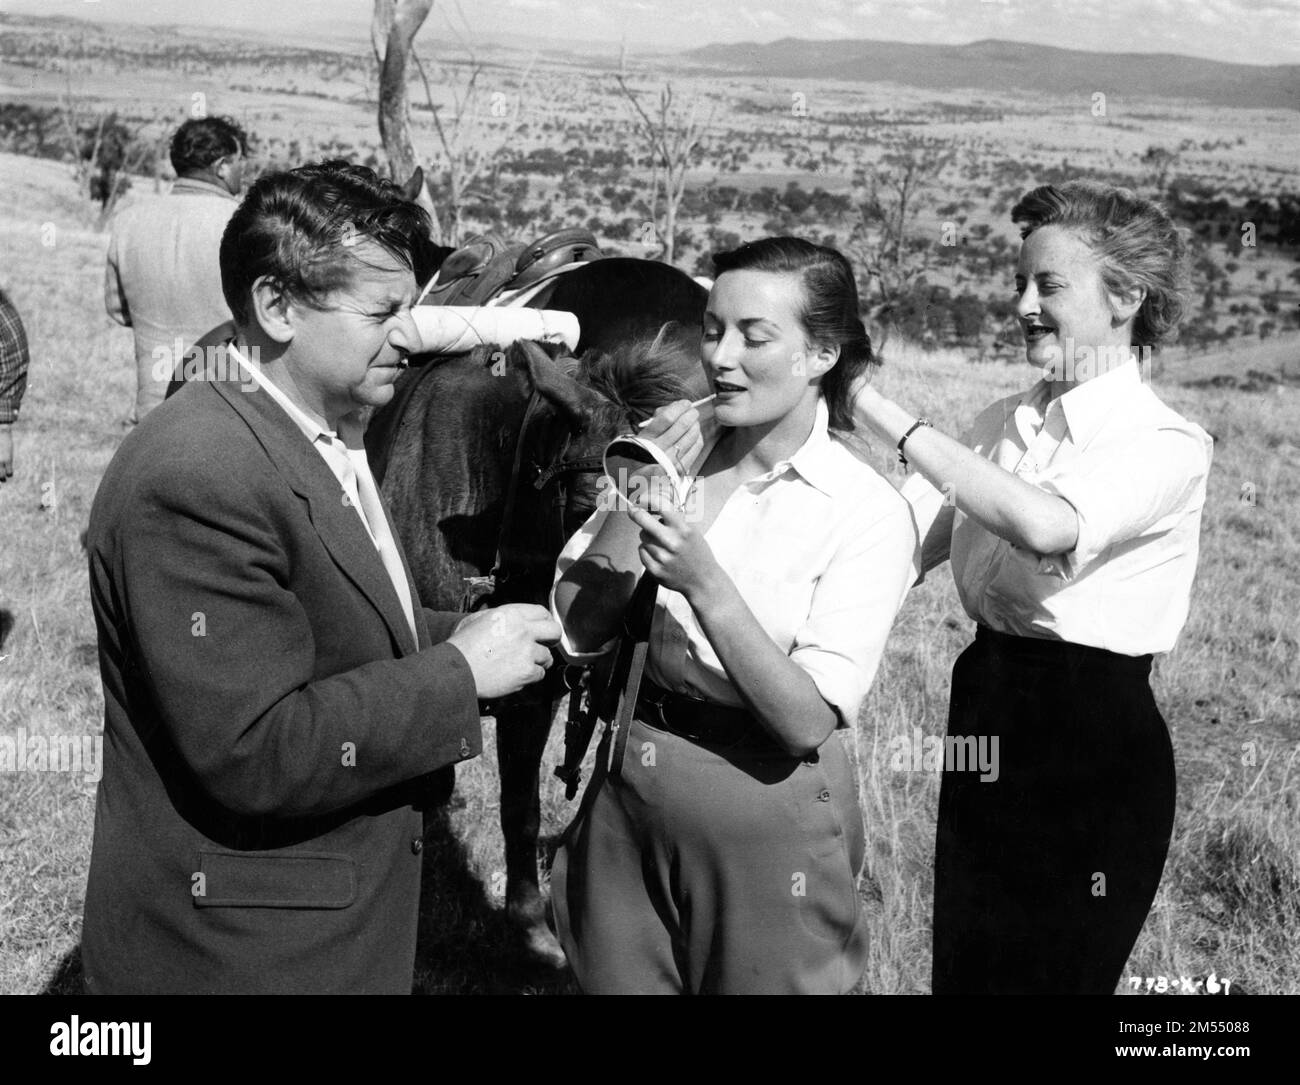 ROSEMARY HARRIS on set location candid in New South Wales, Australia with Make-Up / Hair Artists ALEC GARFATH and FRANCES BOHUN during filming of THE SHIRALEE 1957 director LESLIE NORMAN novel D'Arcy Niland costume design Elizabeth Haffenden music John Addison associate producer Jack Rix producer Michael Balcon Ealing Studios / Metro Goldwyn Mayer (MGM) Stock Photo